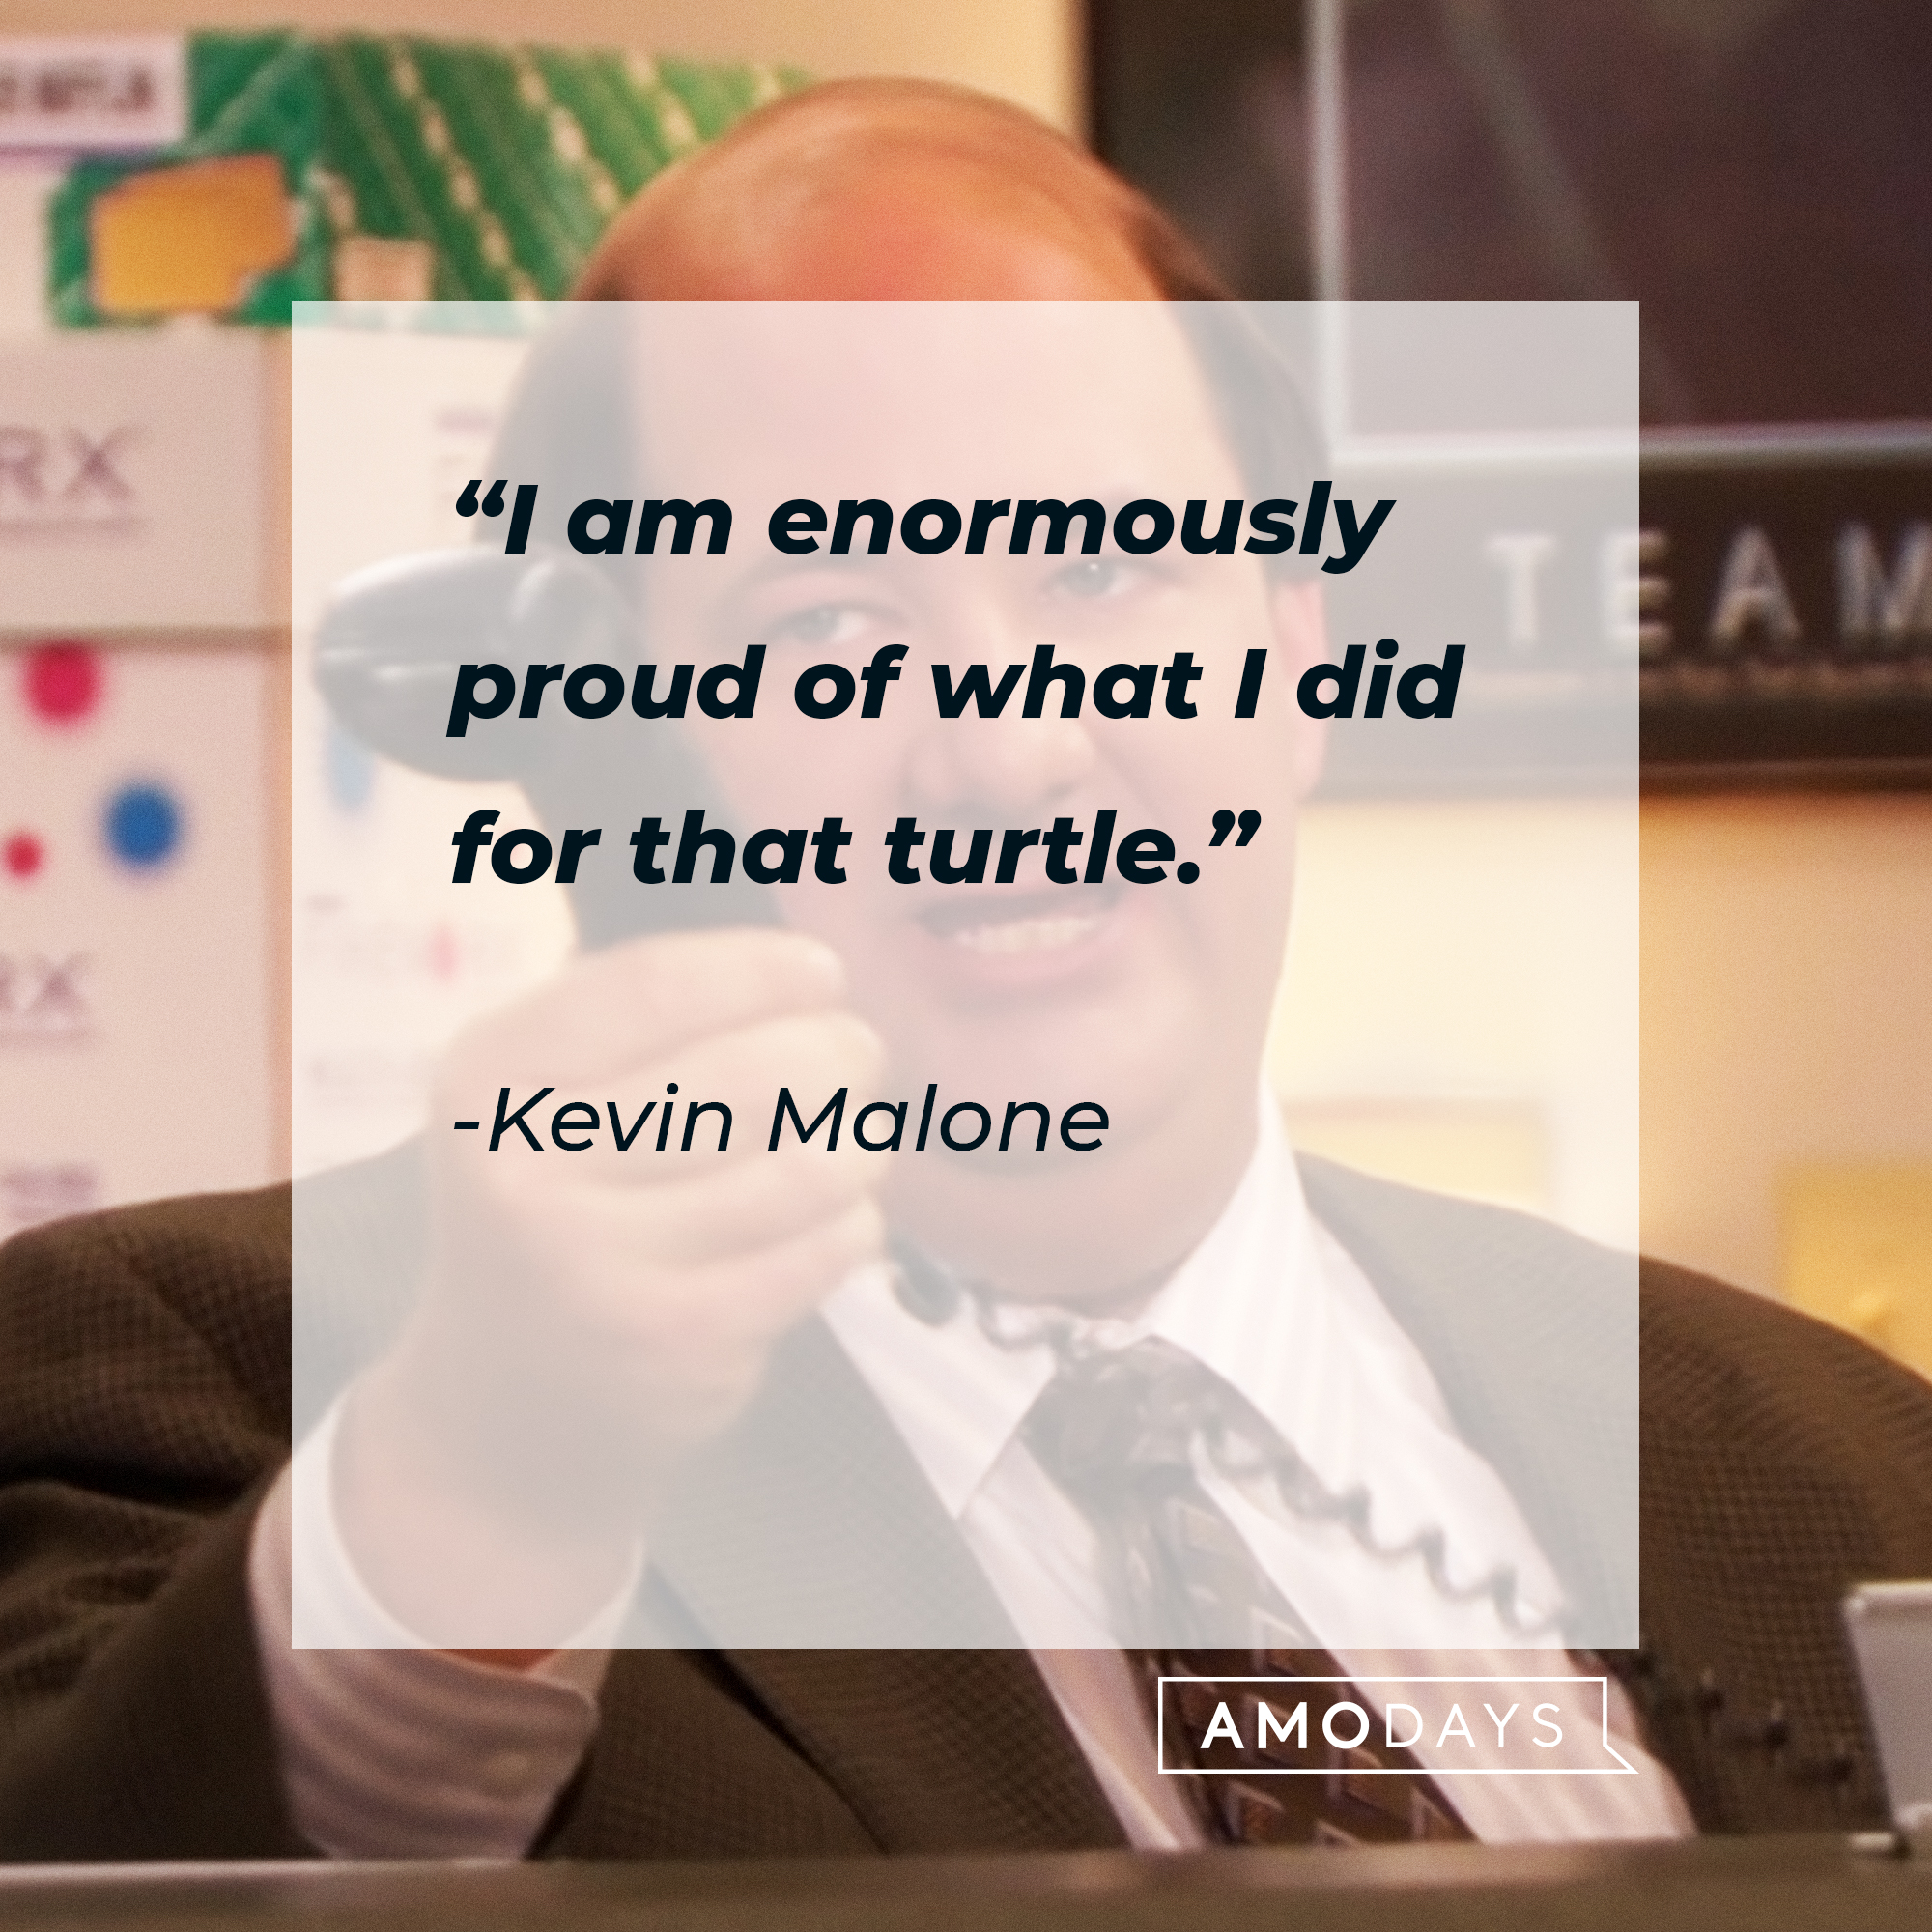 An image of Kevin Malone, with his quote: “I am enormously proud of what I did for that turtle.” | Source: Youtube.com/The Office